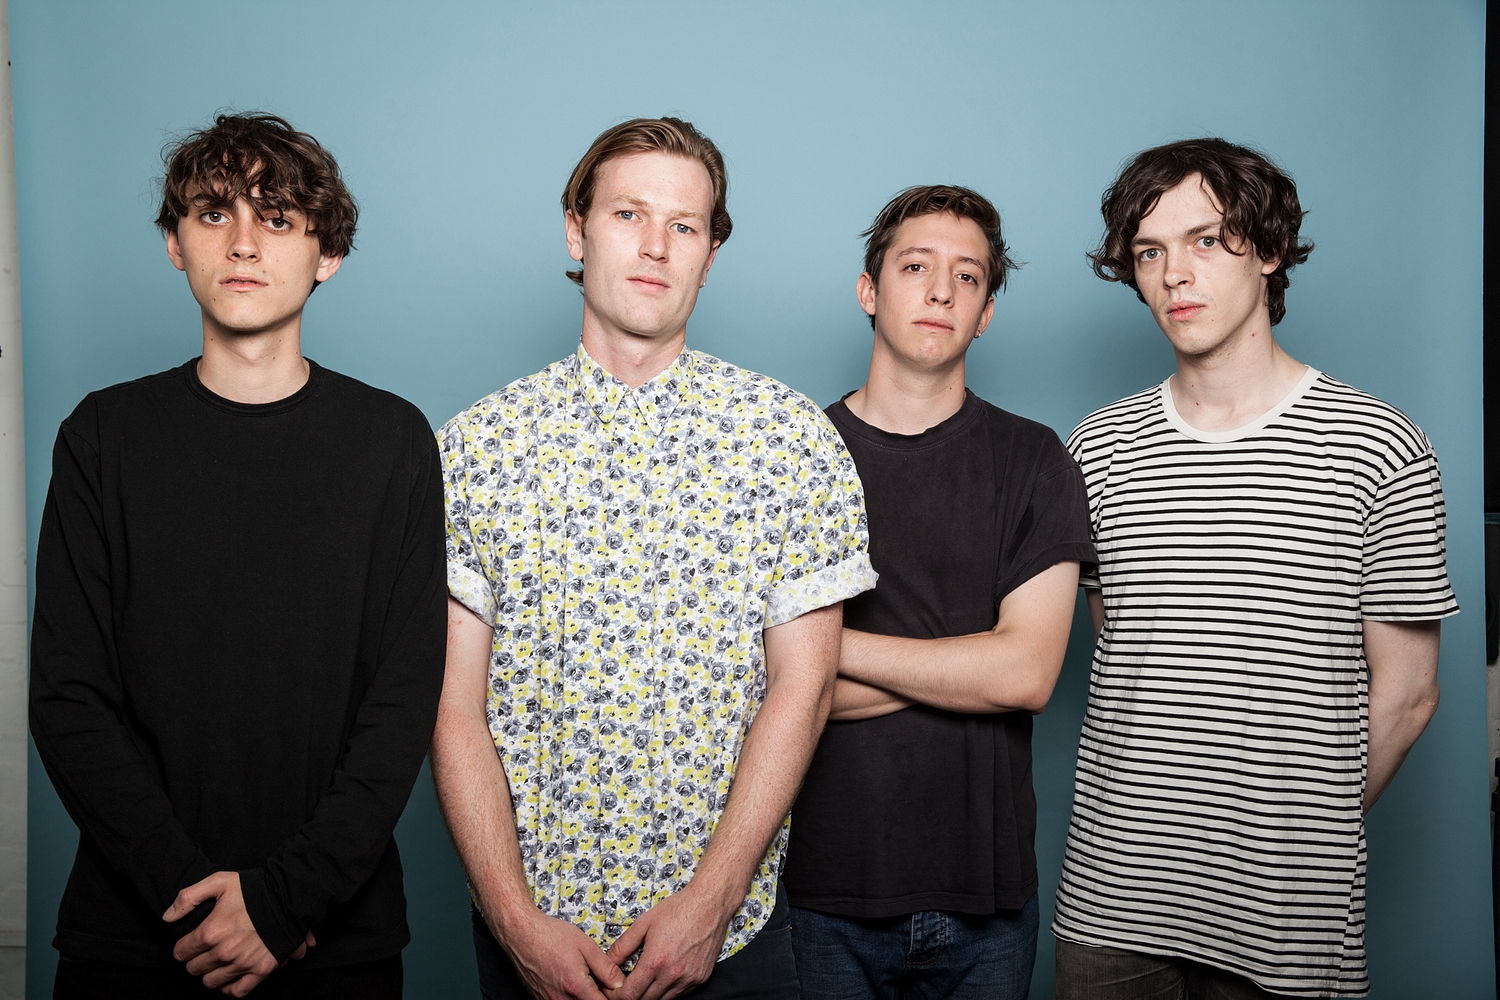 Gengahr: “It’s slowly building up to something”